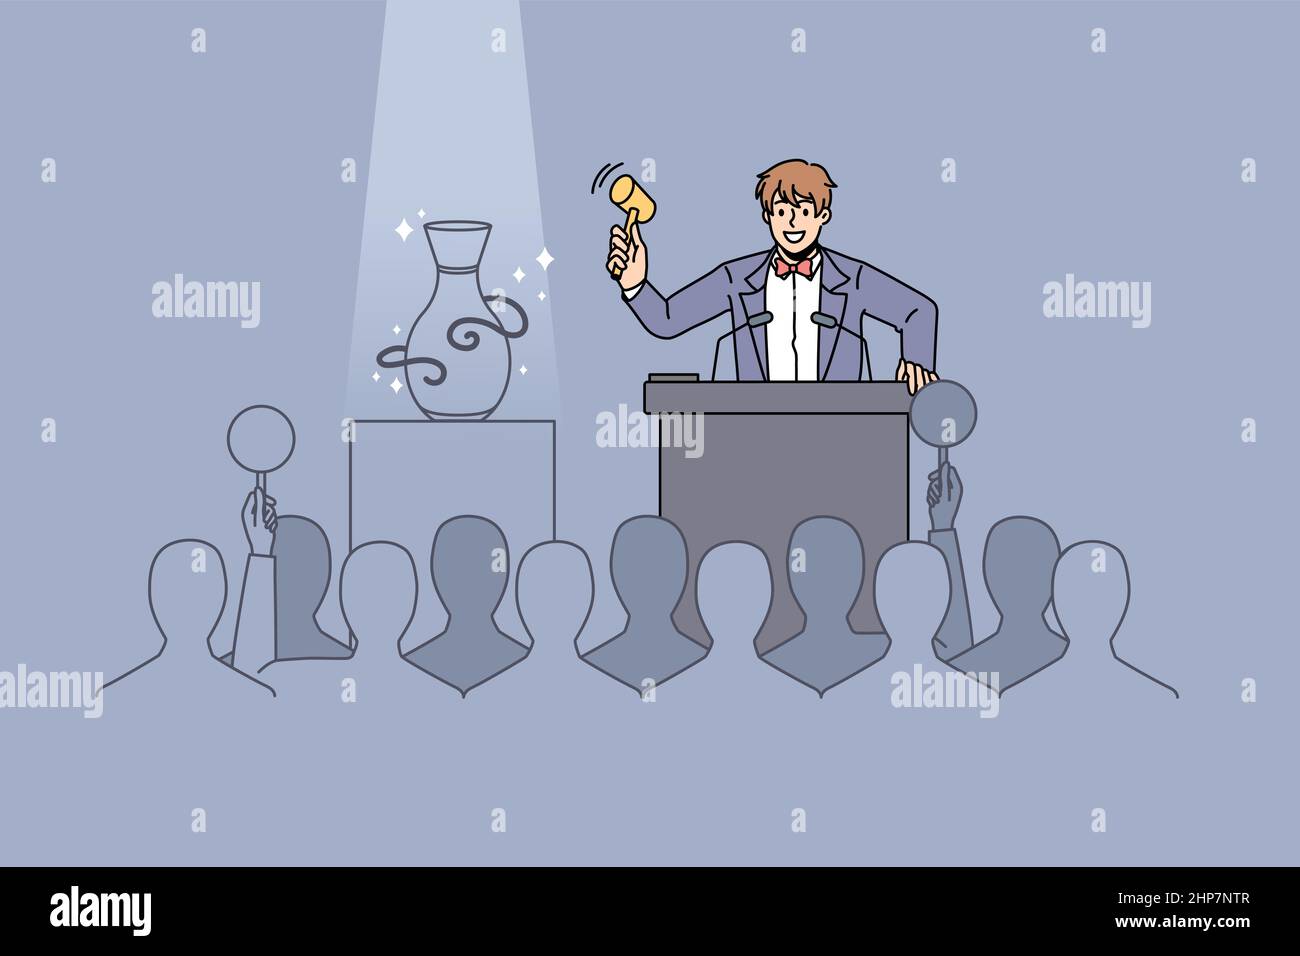 Man seller head auction with diverse buyers Stock Vector